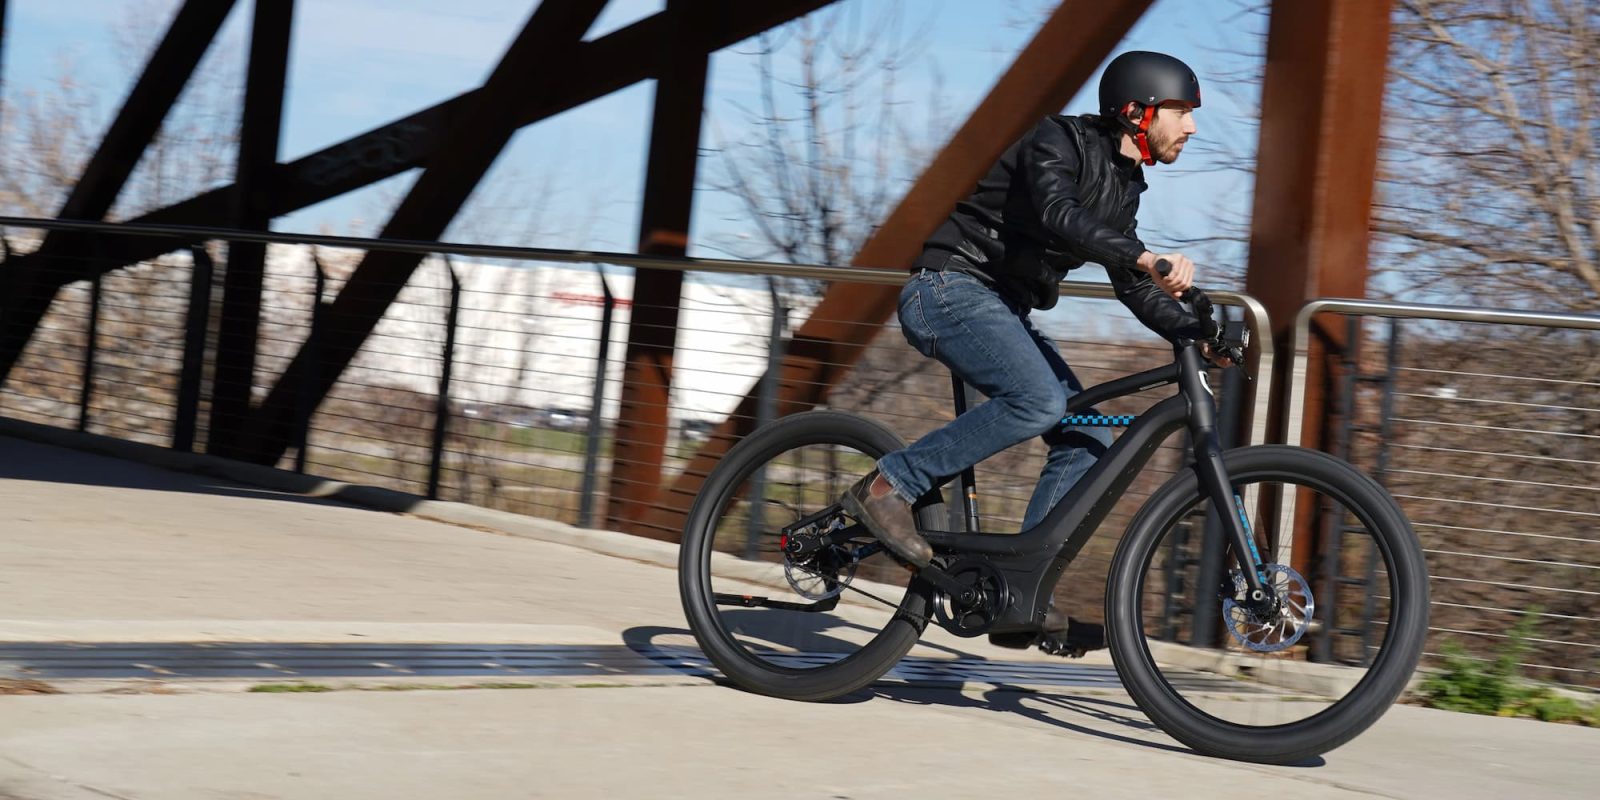 It’s National Bike Month, and pedal bikes are great. But I only ride electric bikes